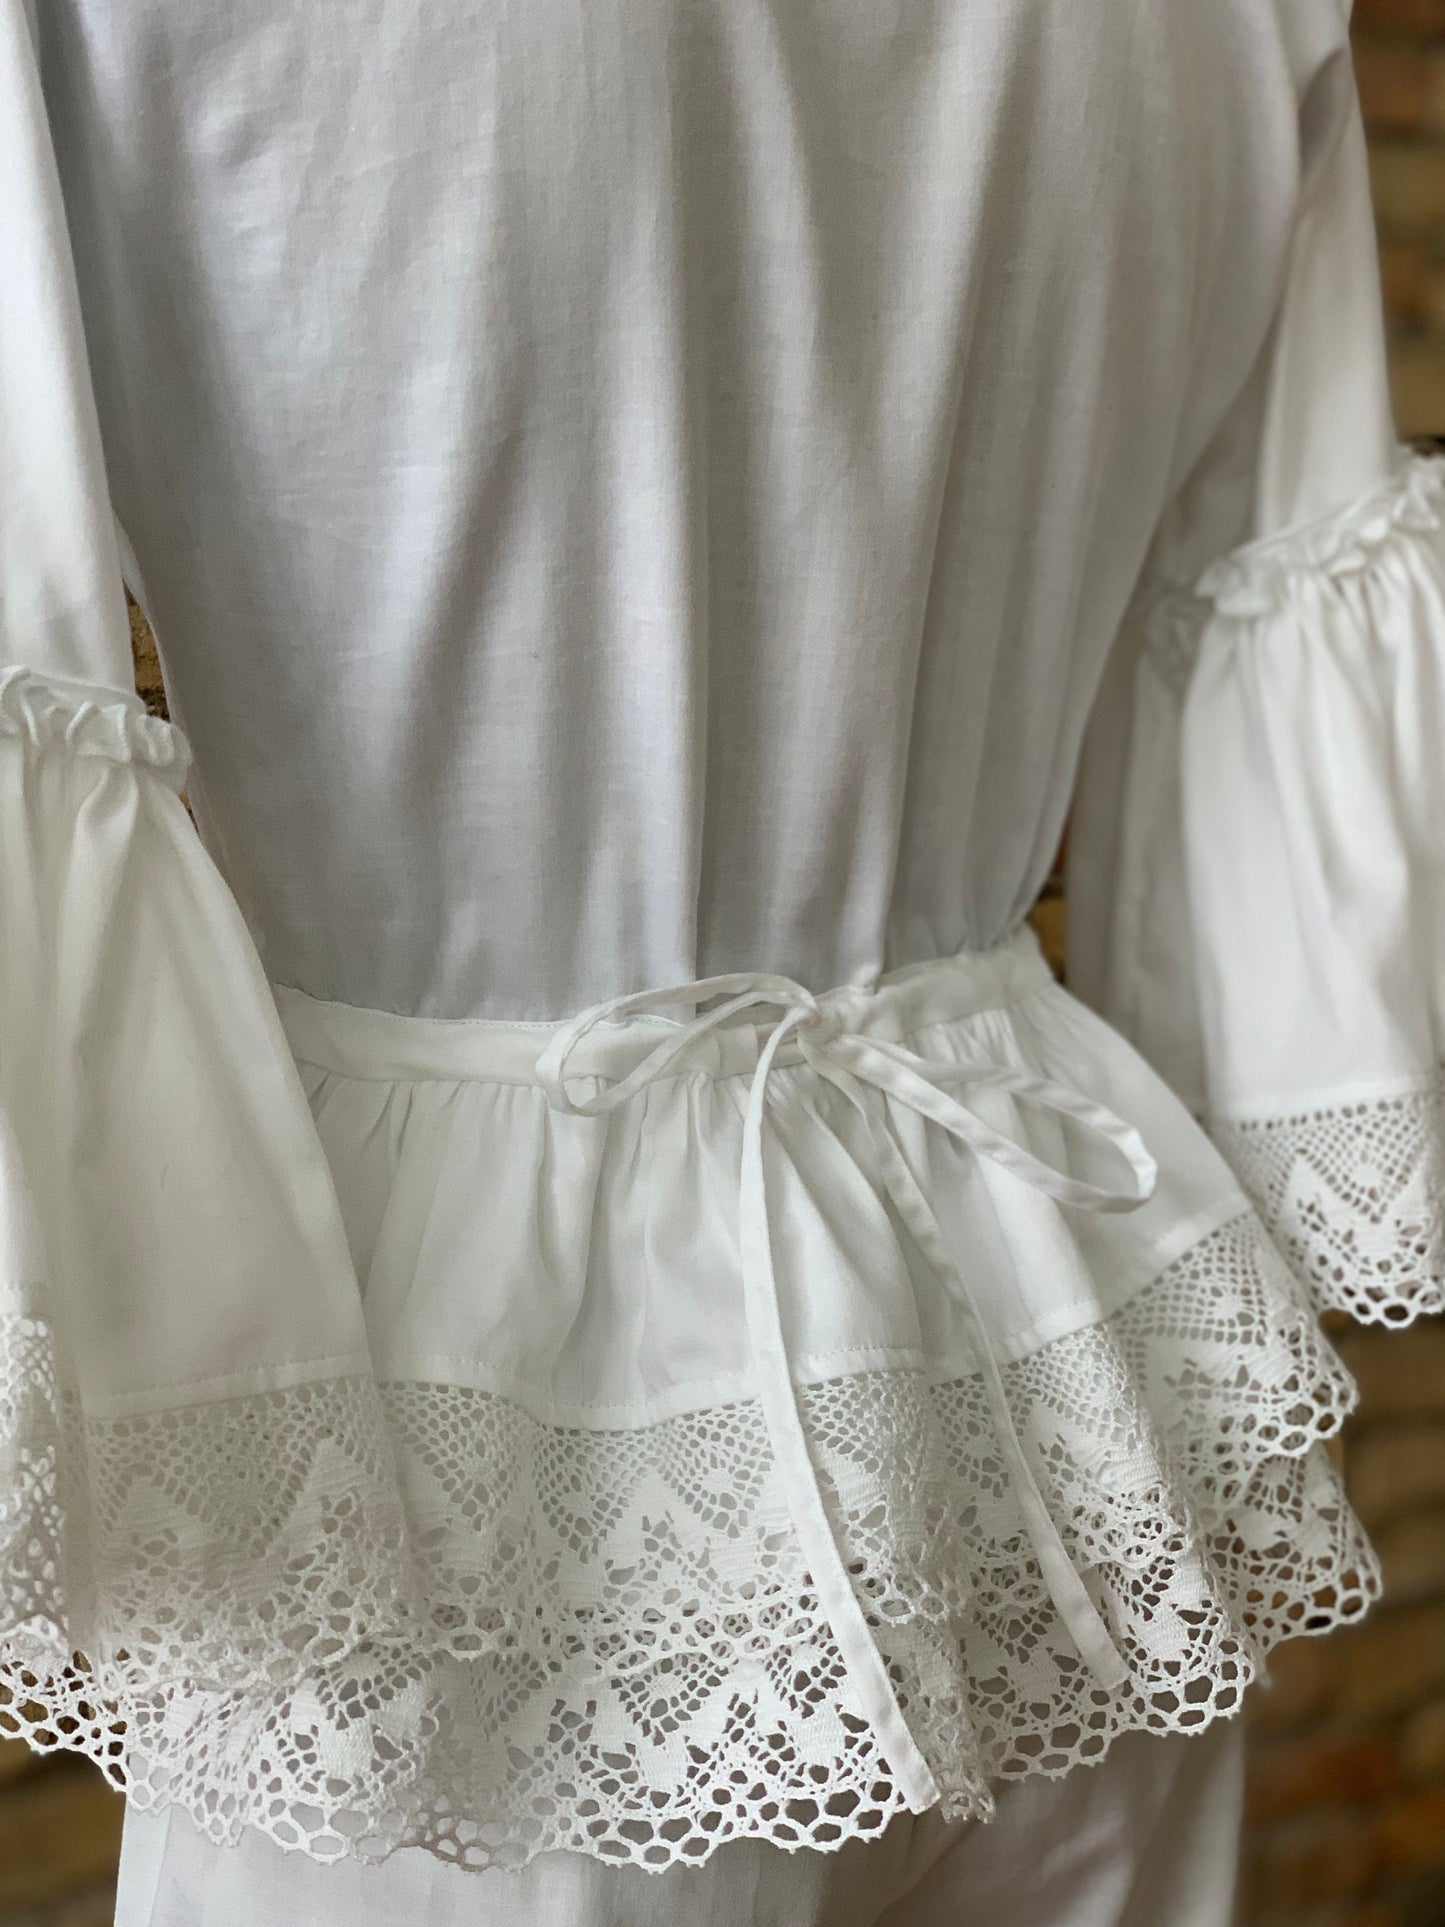 Rococo Nights - Rococo Inspired Loungewear Set in White Cotton